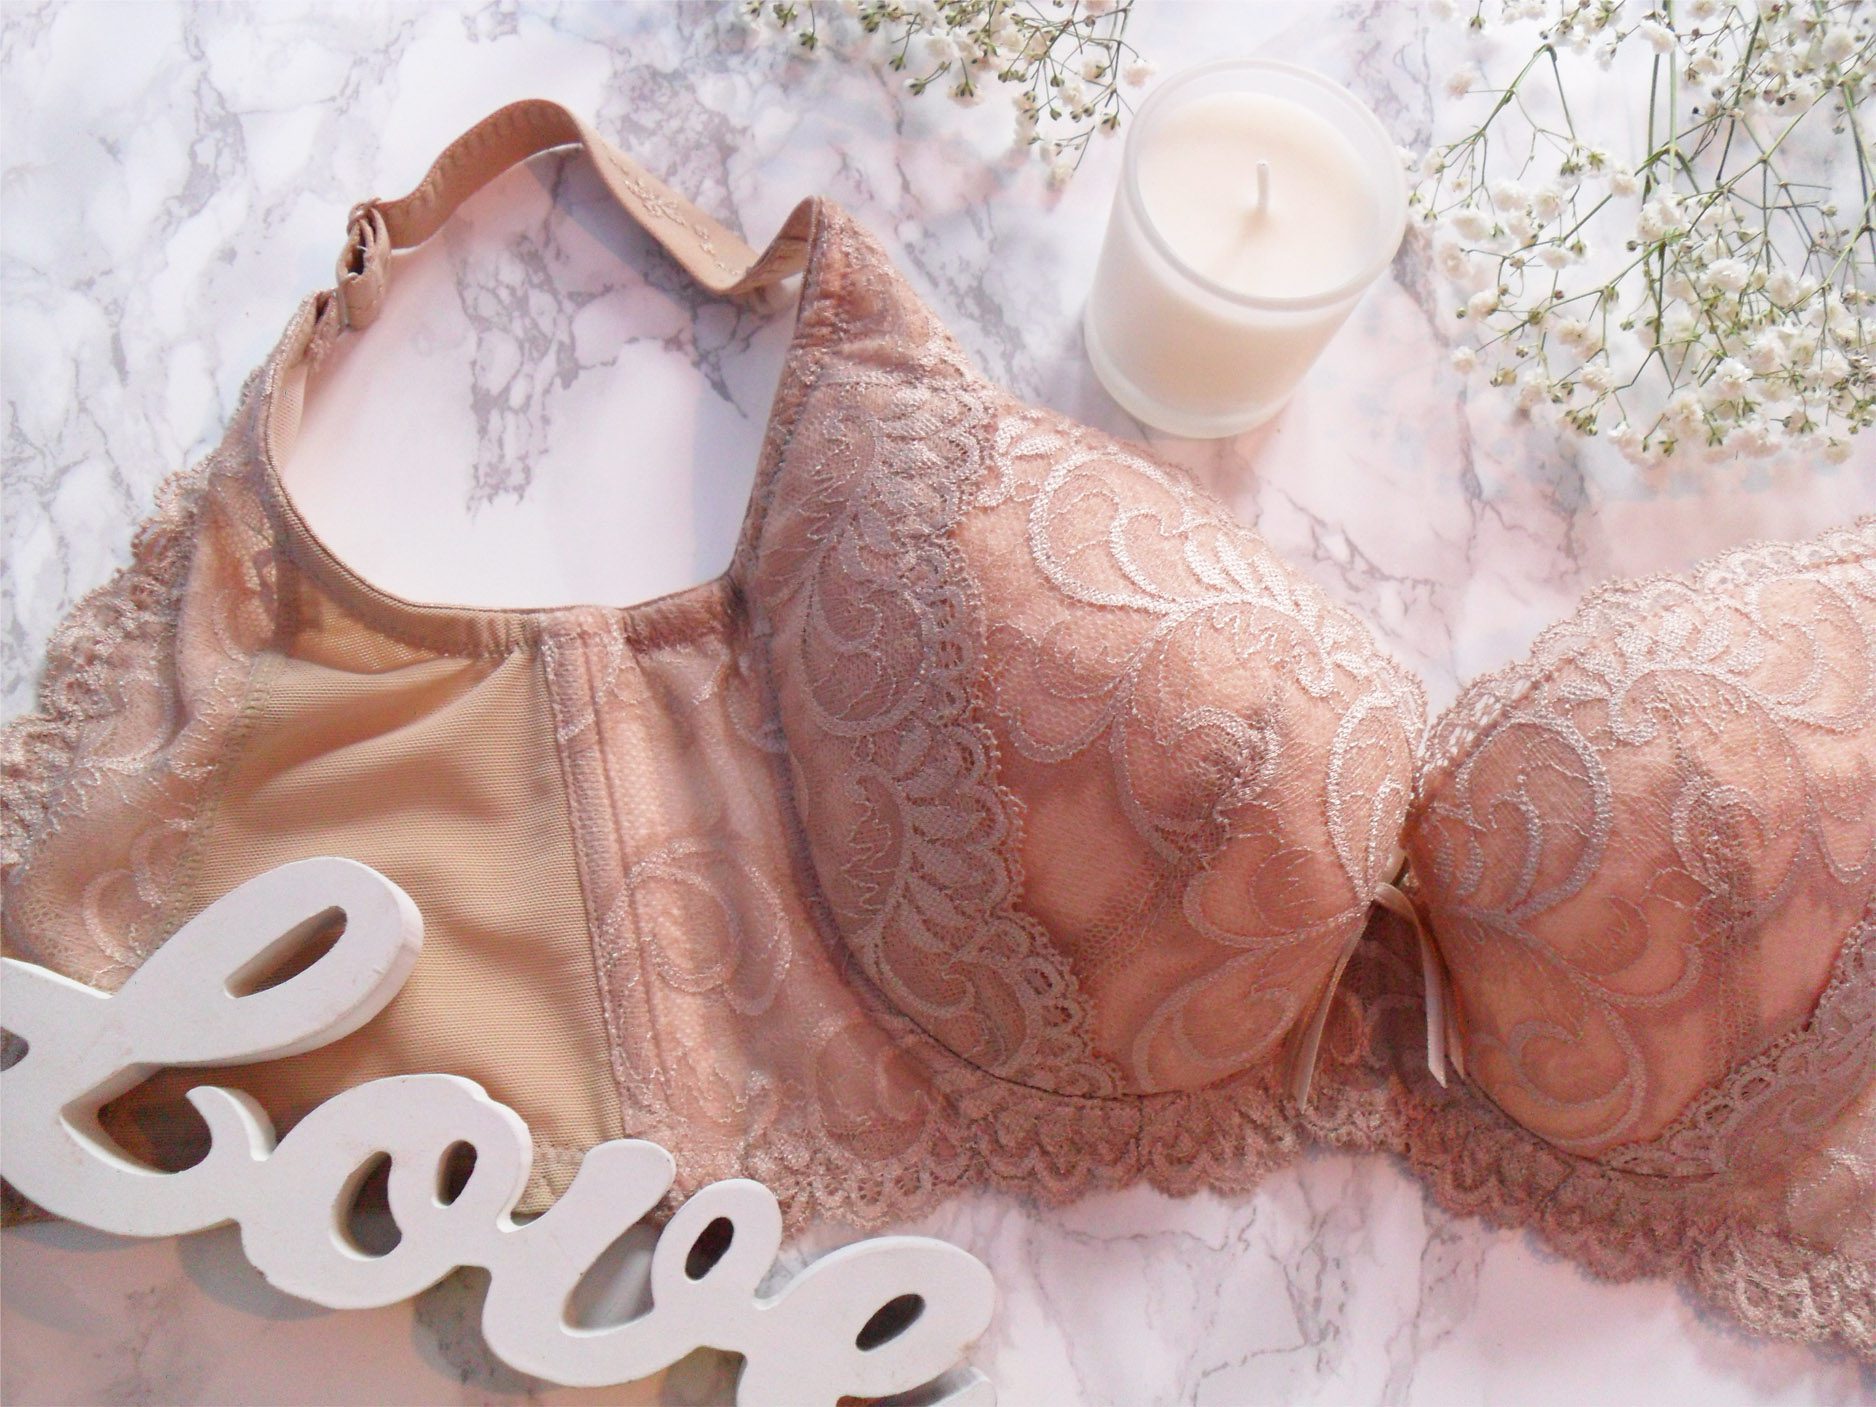 Forget what they told you! Bralettes - Panache Lingerie